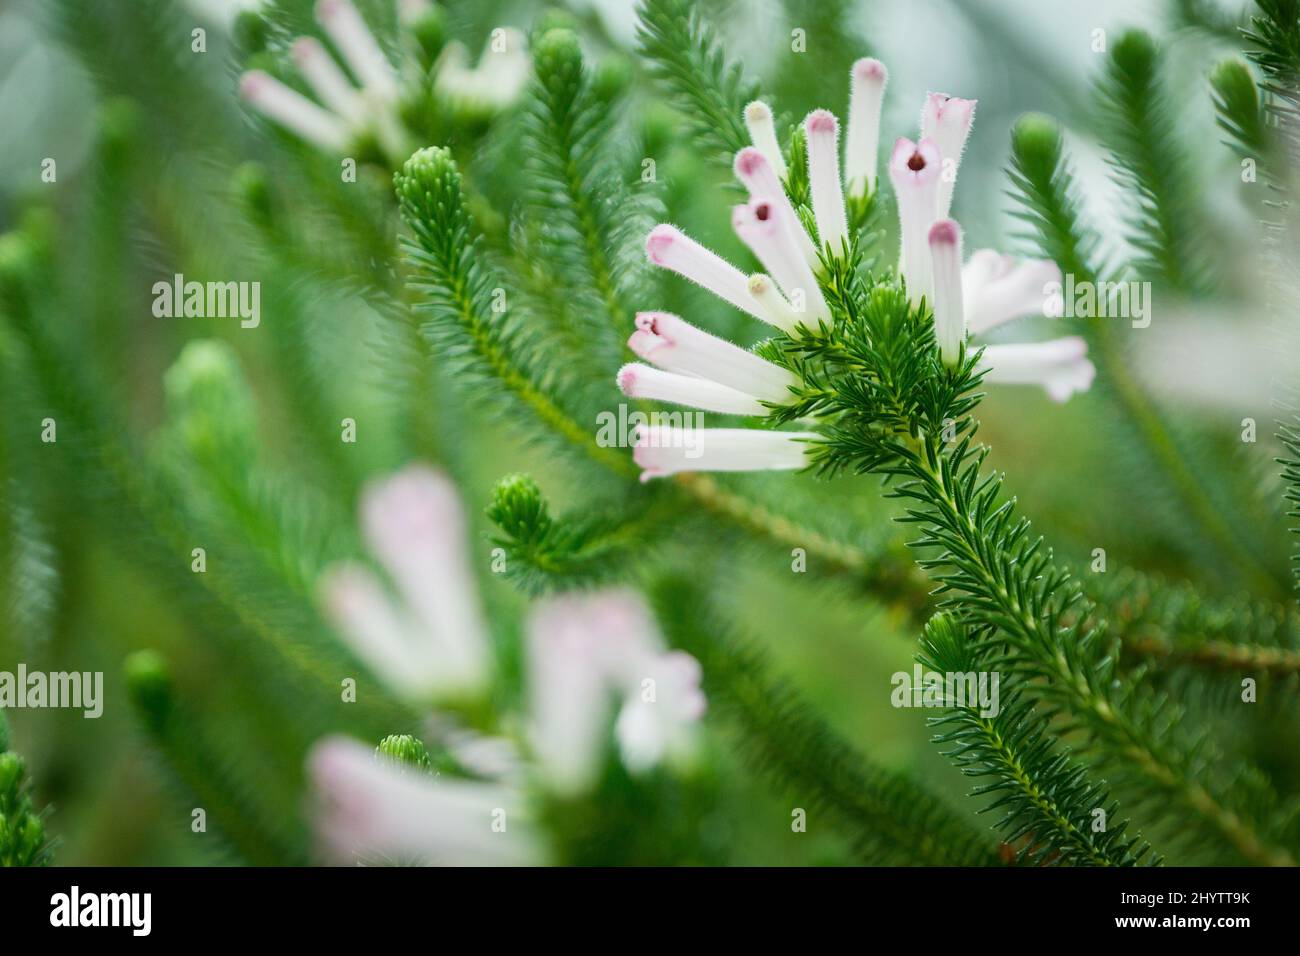 Closeup shot of a Pichi flowers on its bush with a blurry green background Stock Photo